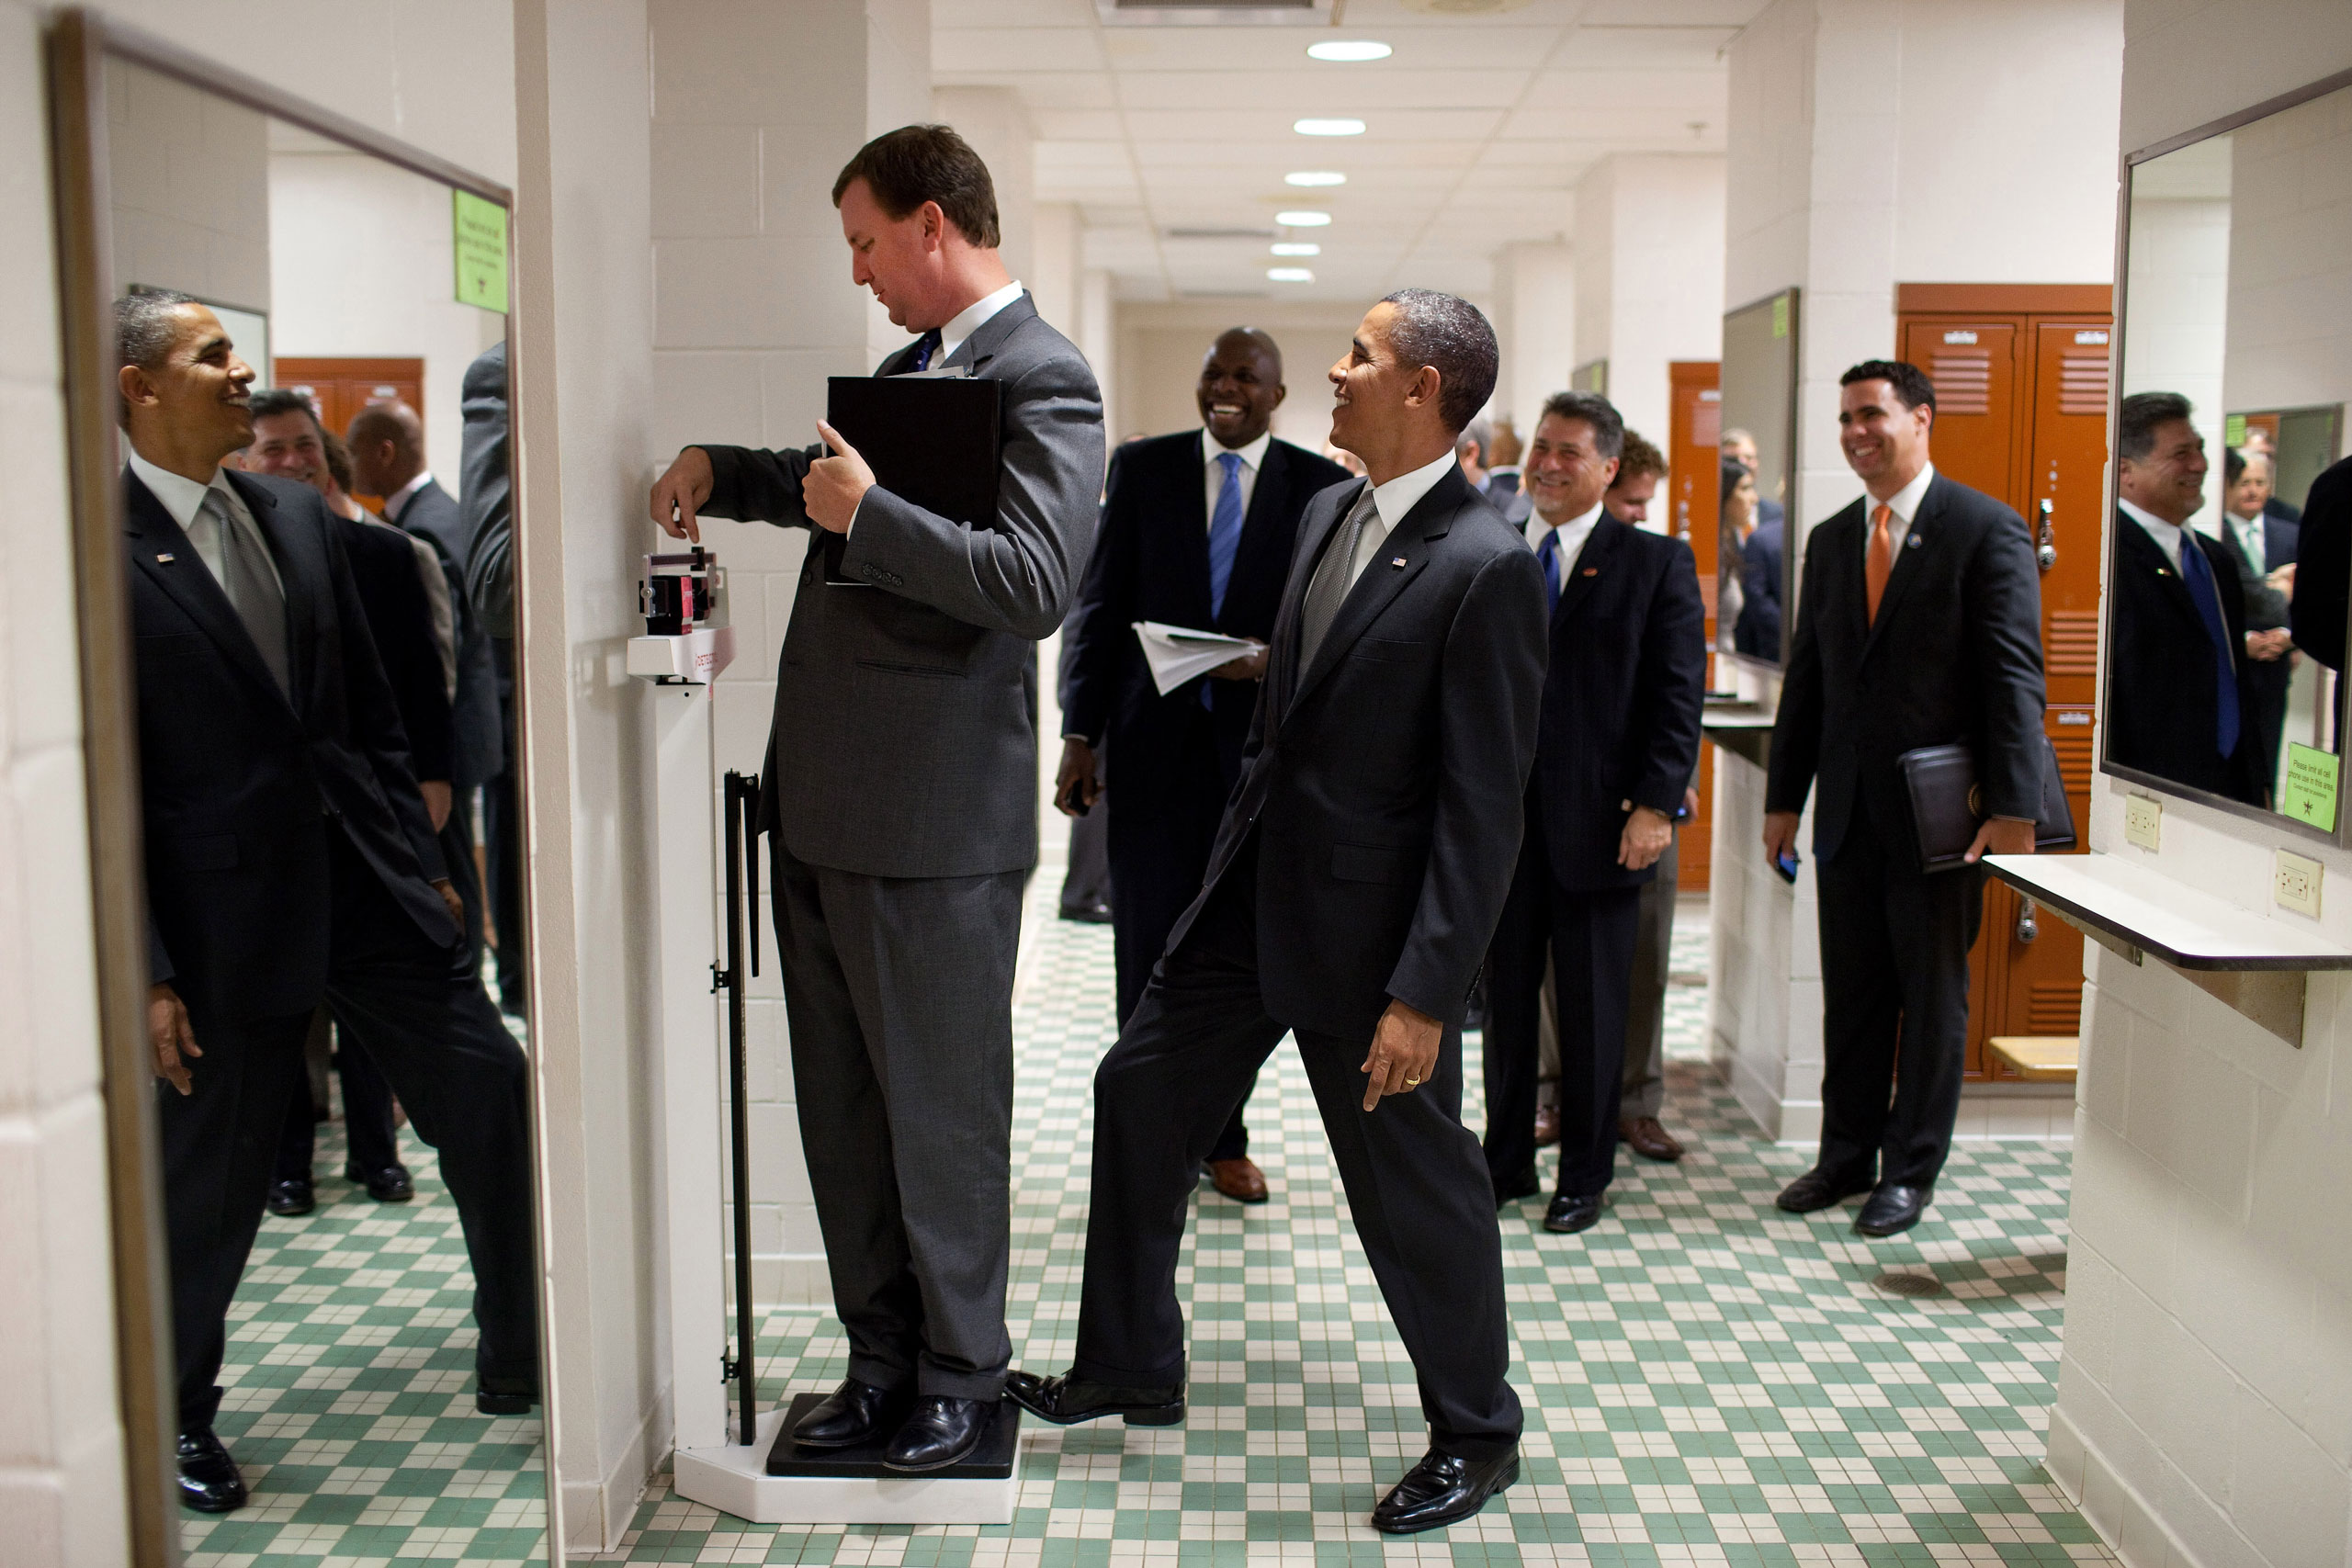 We were walking through a locker room at the University of Texas on August 9, 2010, when White House Trip Director Marvin Nicholson stopped to weigh himself on a scale. Unbeknownst to him, the President was stepping on the back of the scale, as Marvin continued to slide the scale lever. Everyone but Marvin was in on the joke.